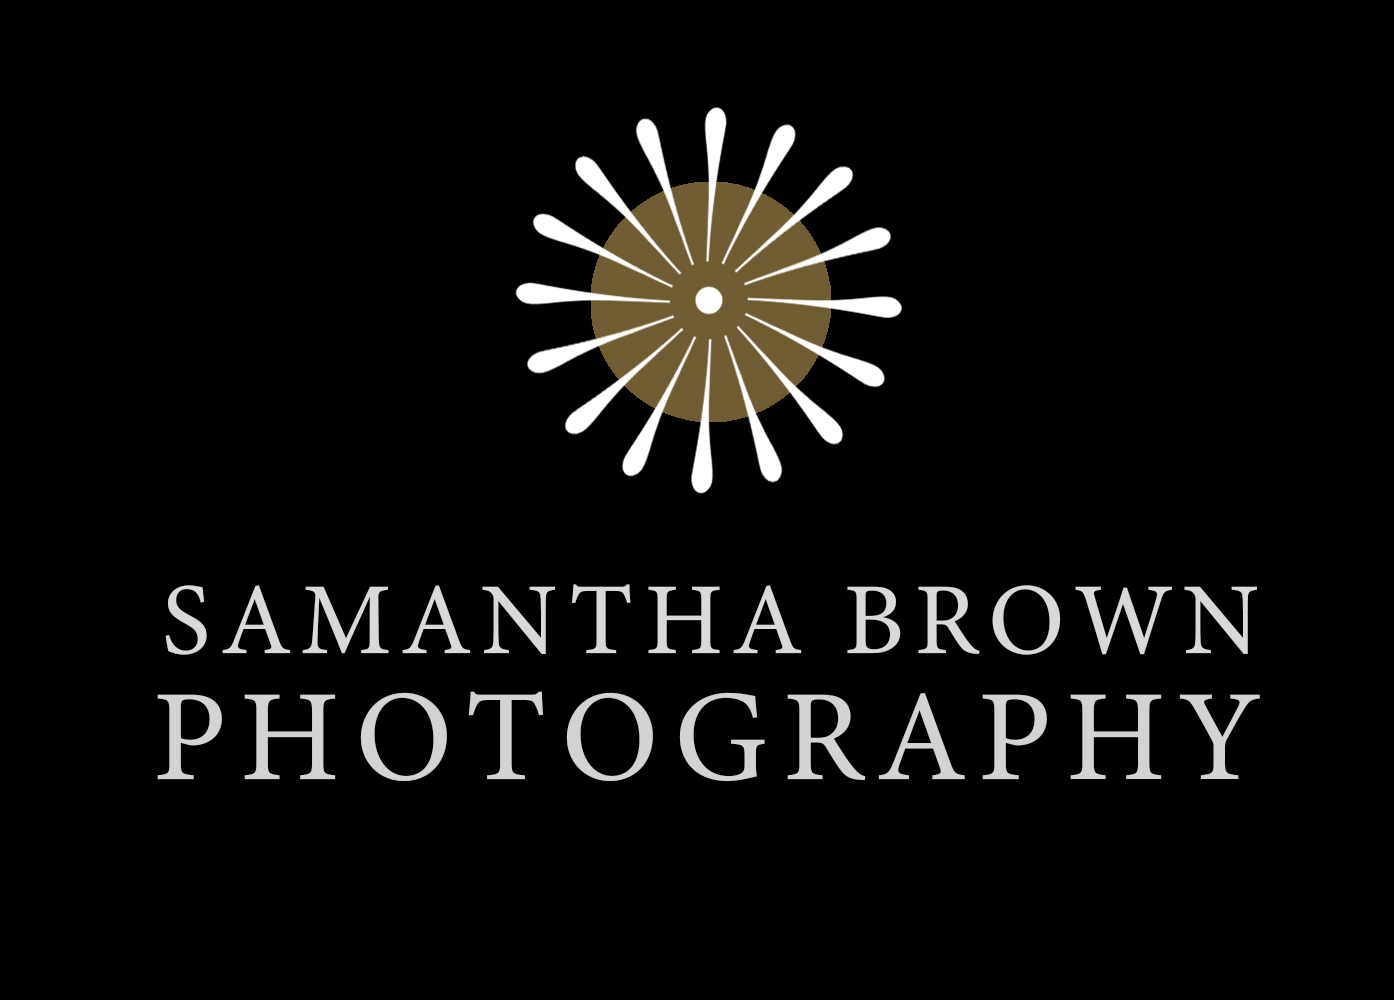 Samantha Brown Photography - Commercial photographer Liverpool Logo